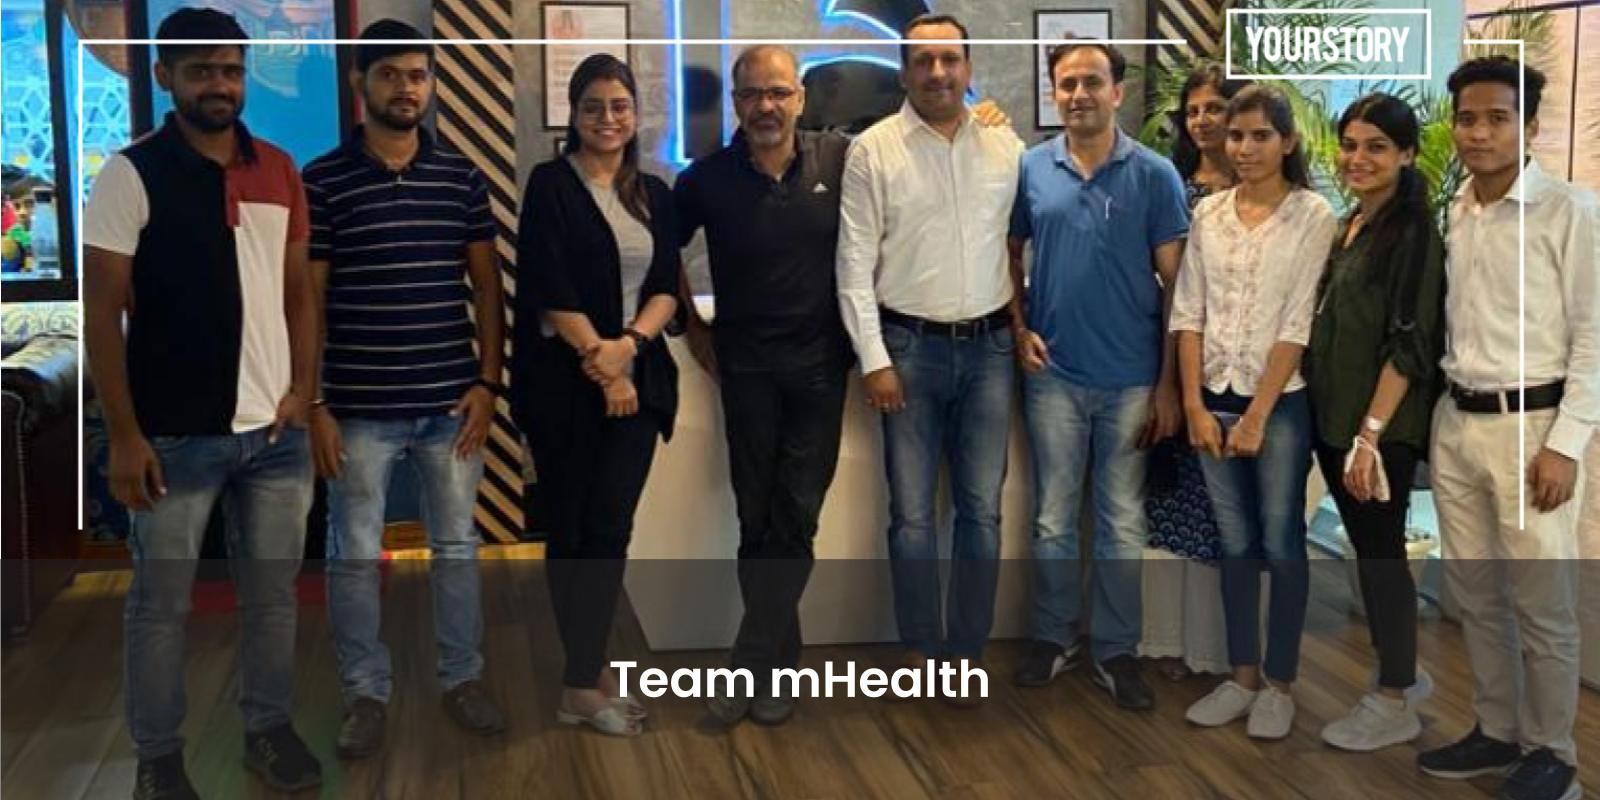 [Funding alert] Delhi-based mHealth raises seed investment in a round led by India Accelerator